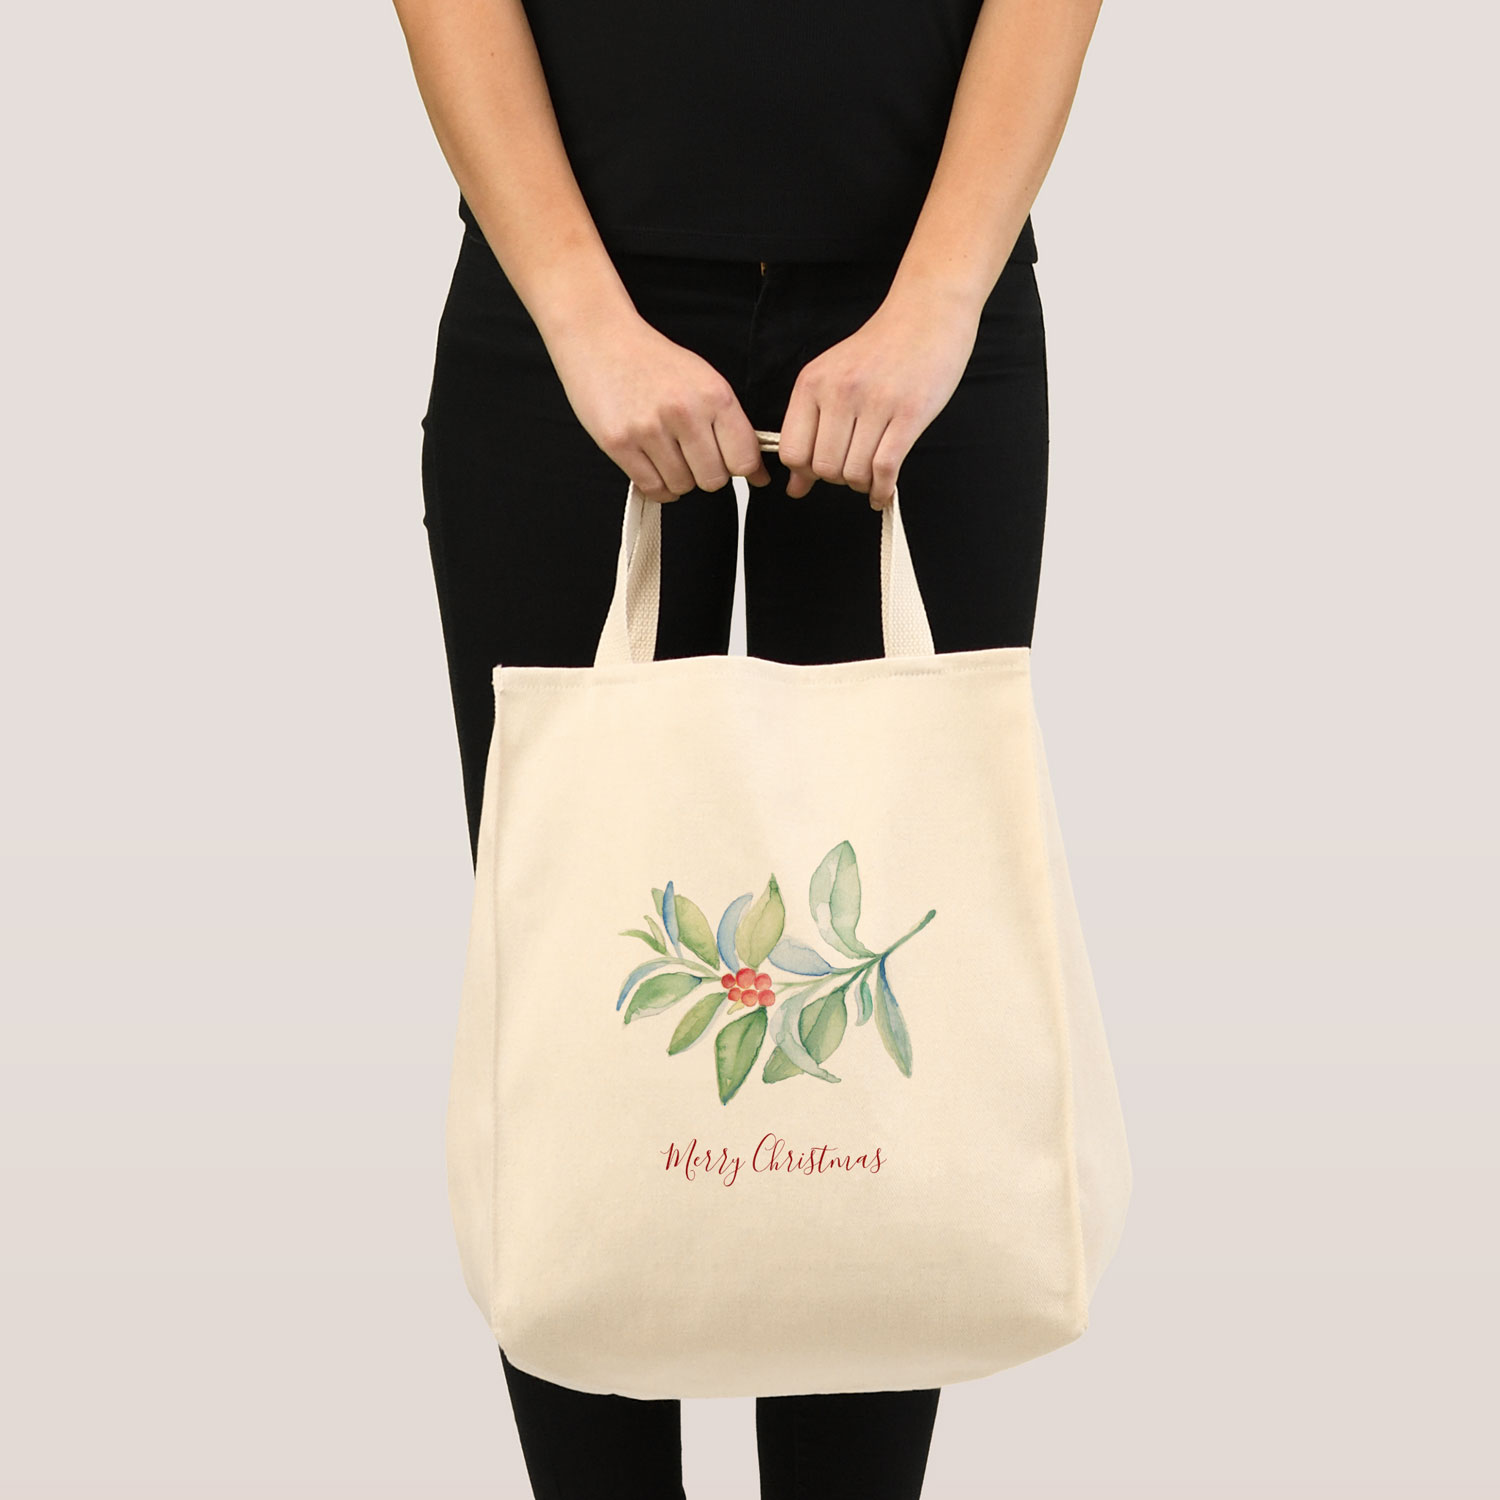 Reusable Christmas shopping bags feature unique watercolor greenery and red berries. Click to shop